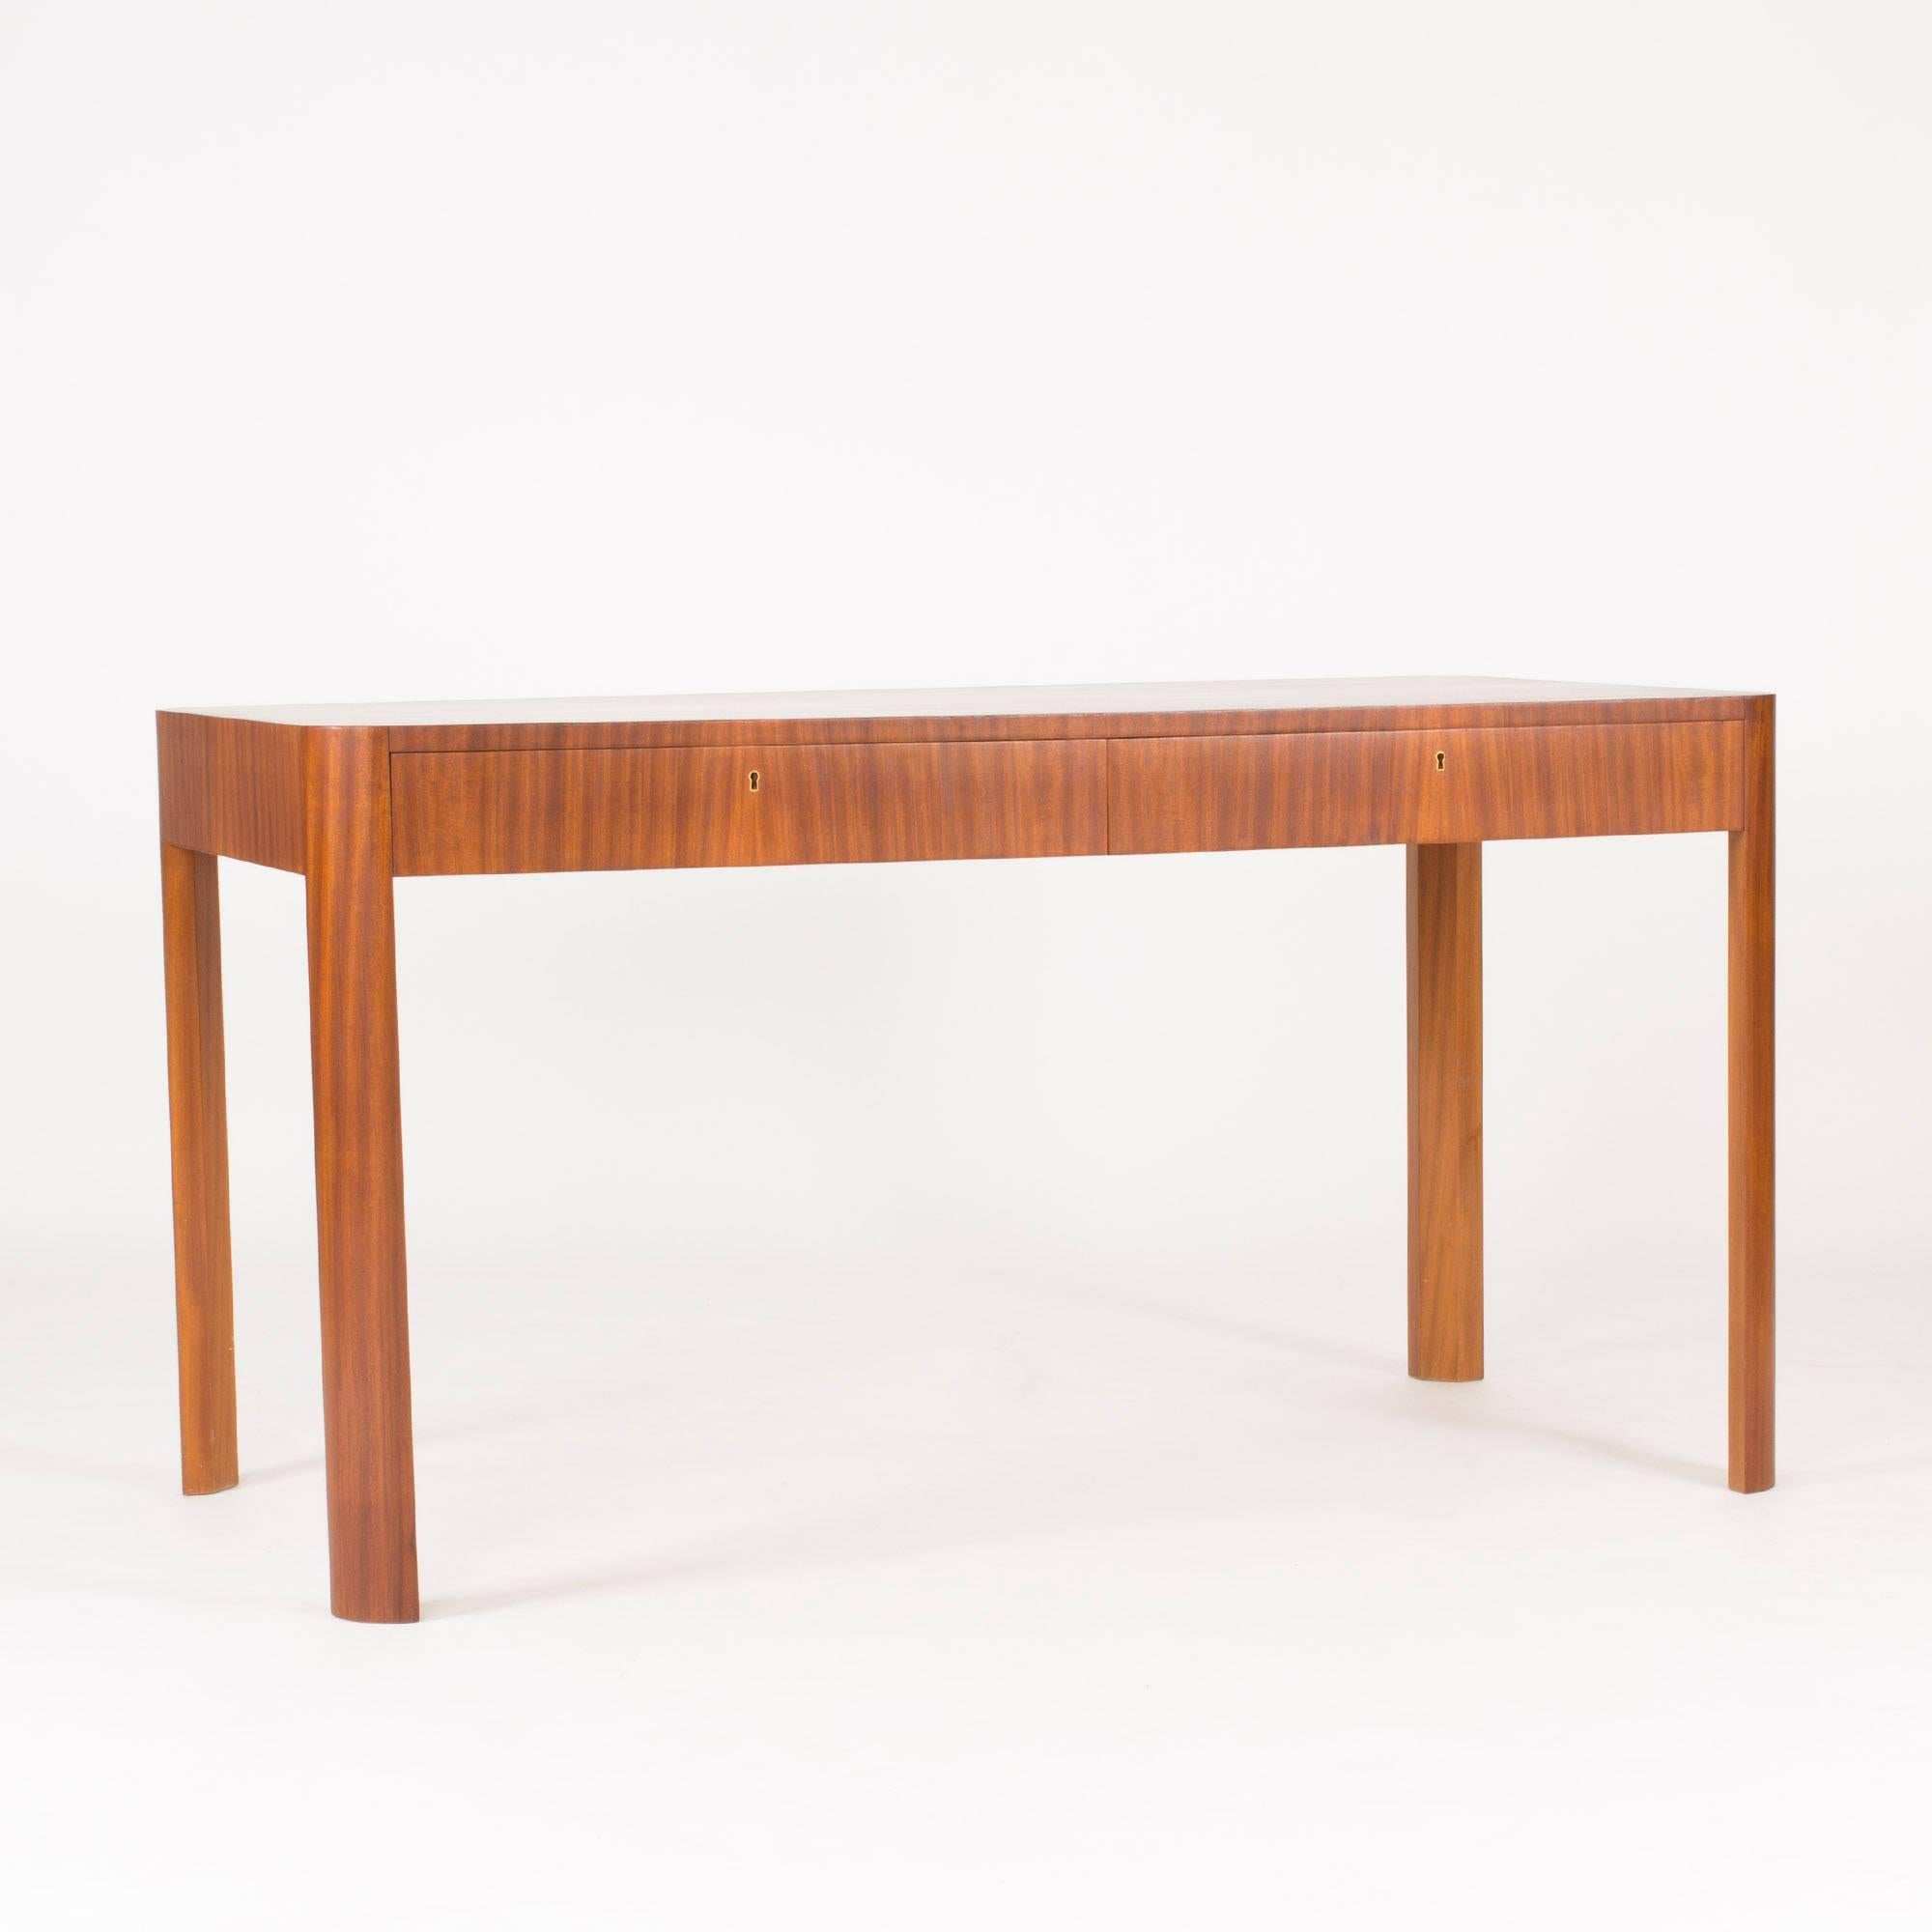 Beautiful functionalist desk, in all likelihood designed by Margareta Köhler for her company Futurum. Great mahogany veneer laid in vertical stripes on the sides. Rounded corners and legs give softness to the strict design. Some small repairs have